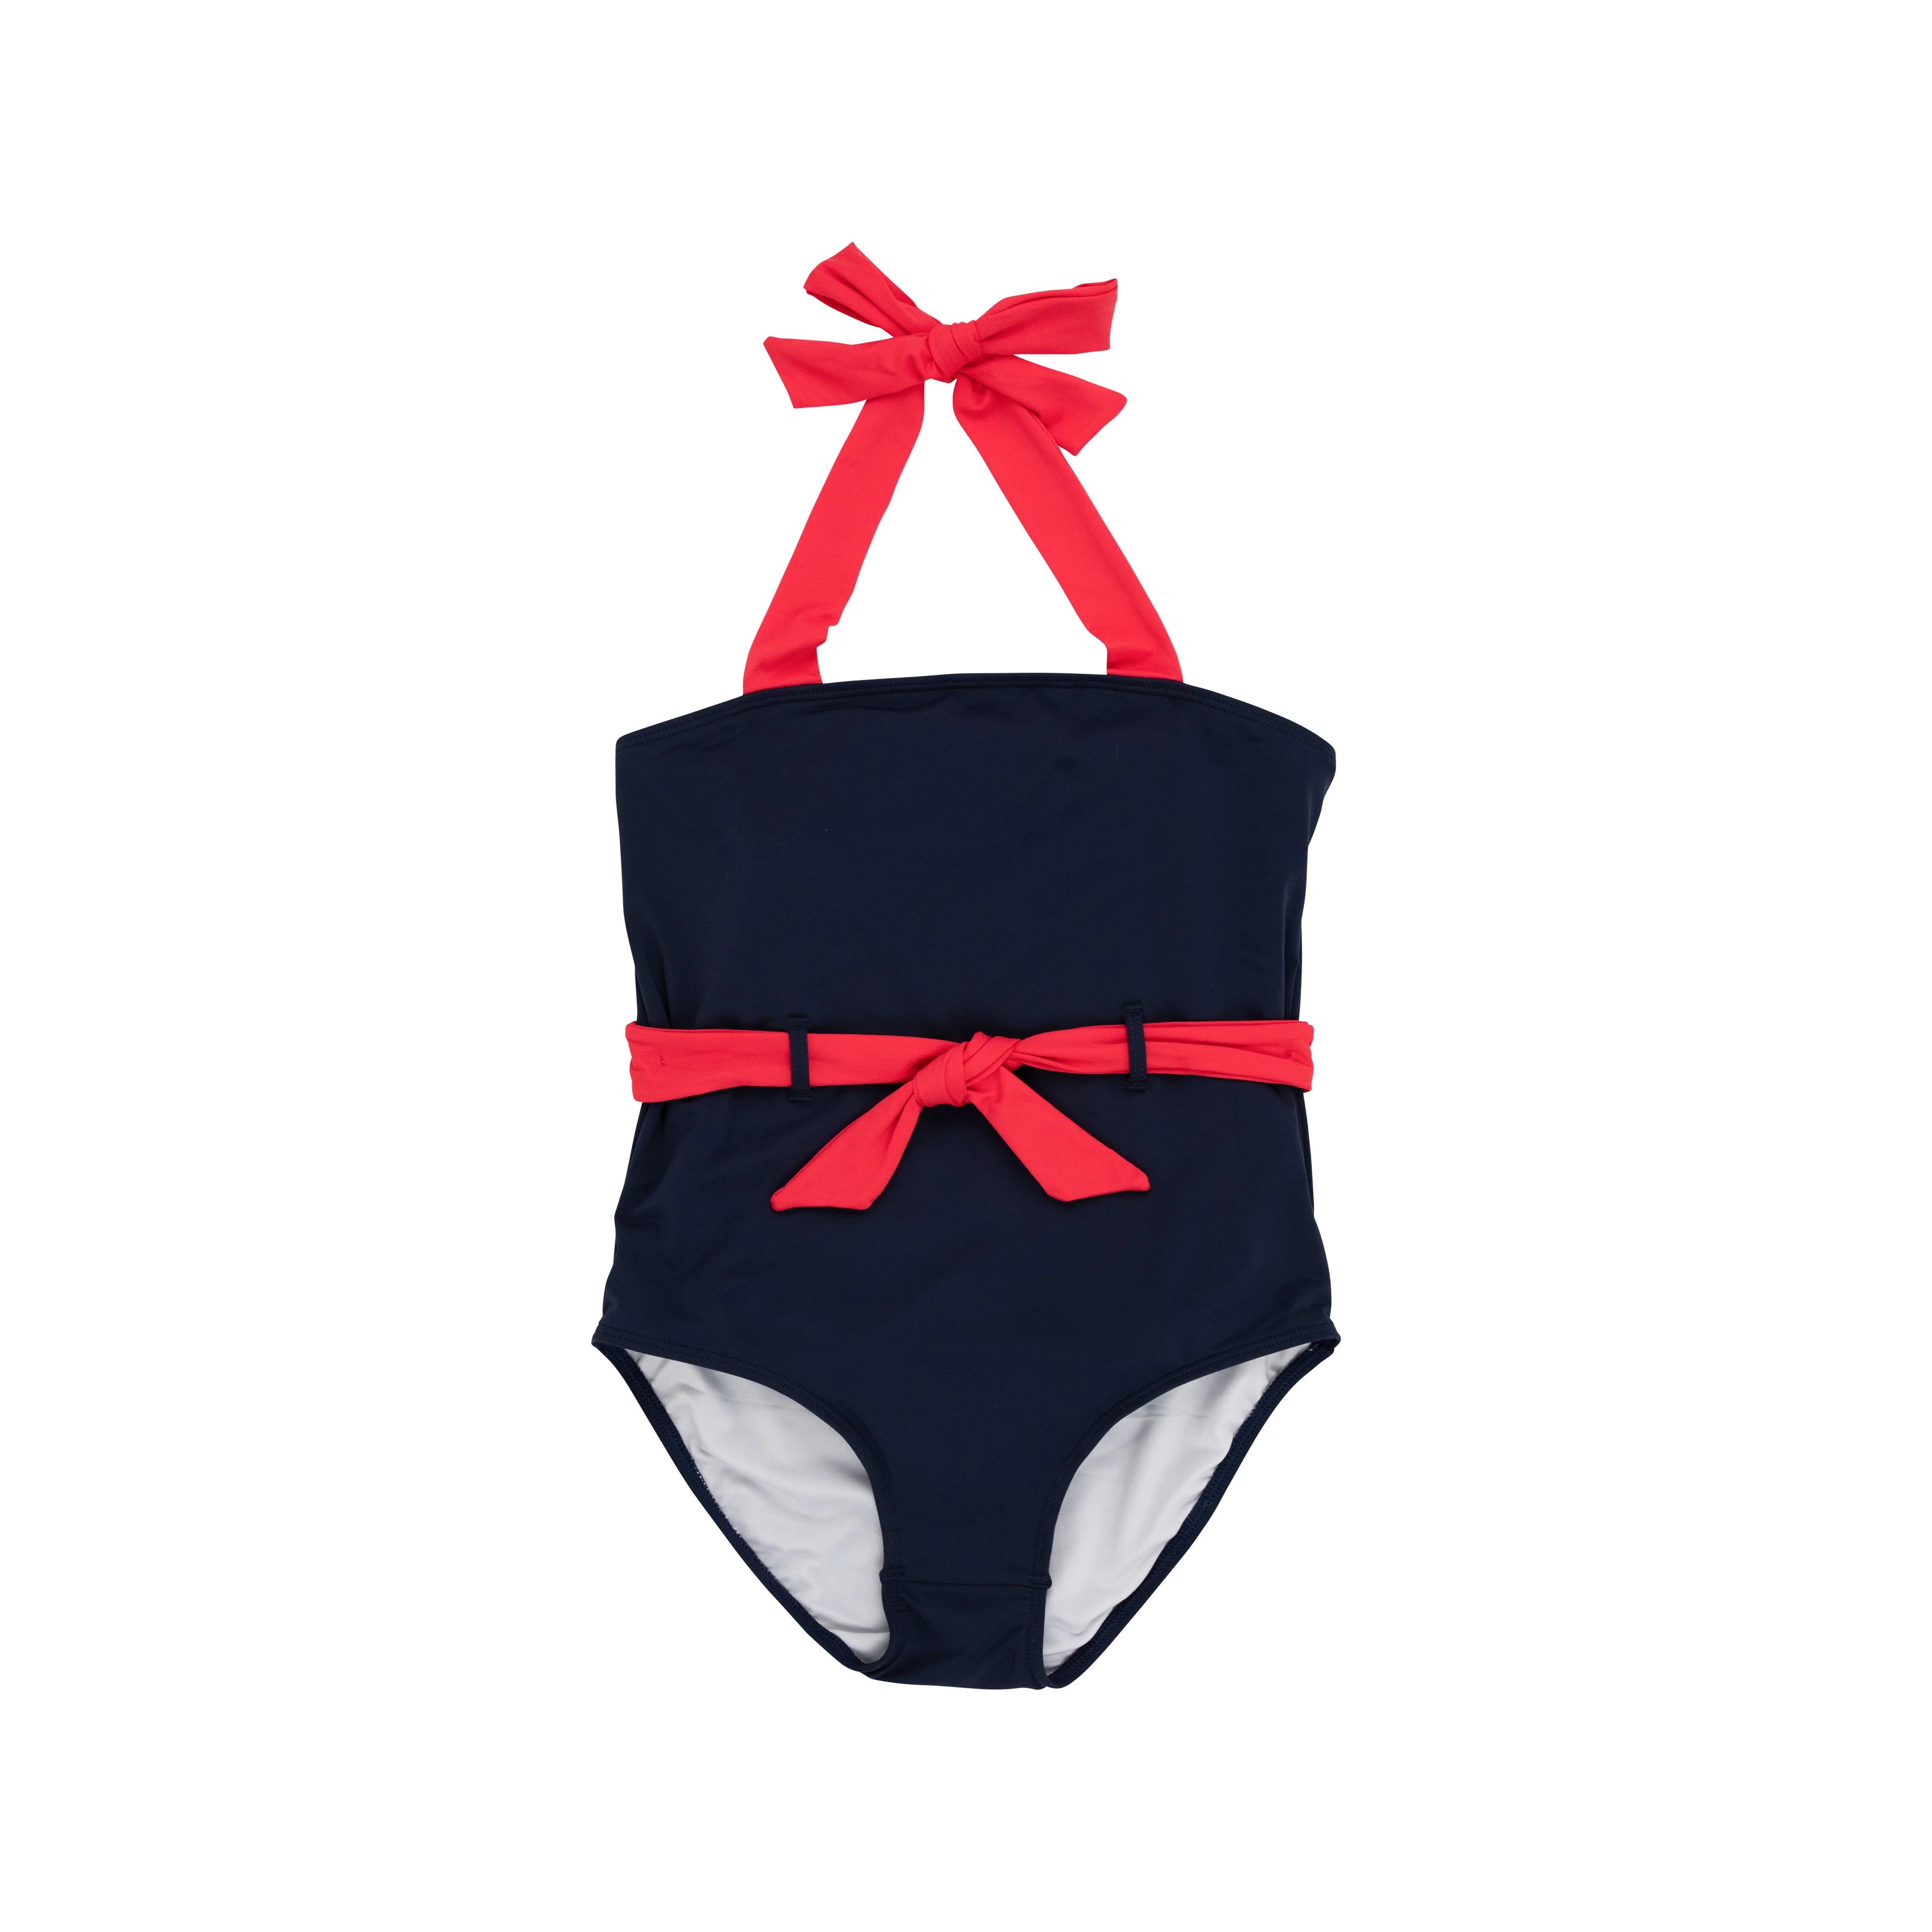 Palm Beach Bathing Suit - Nantucket Navy with Richmond Red | The Beaufort Bonnet Company